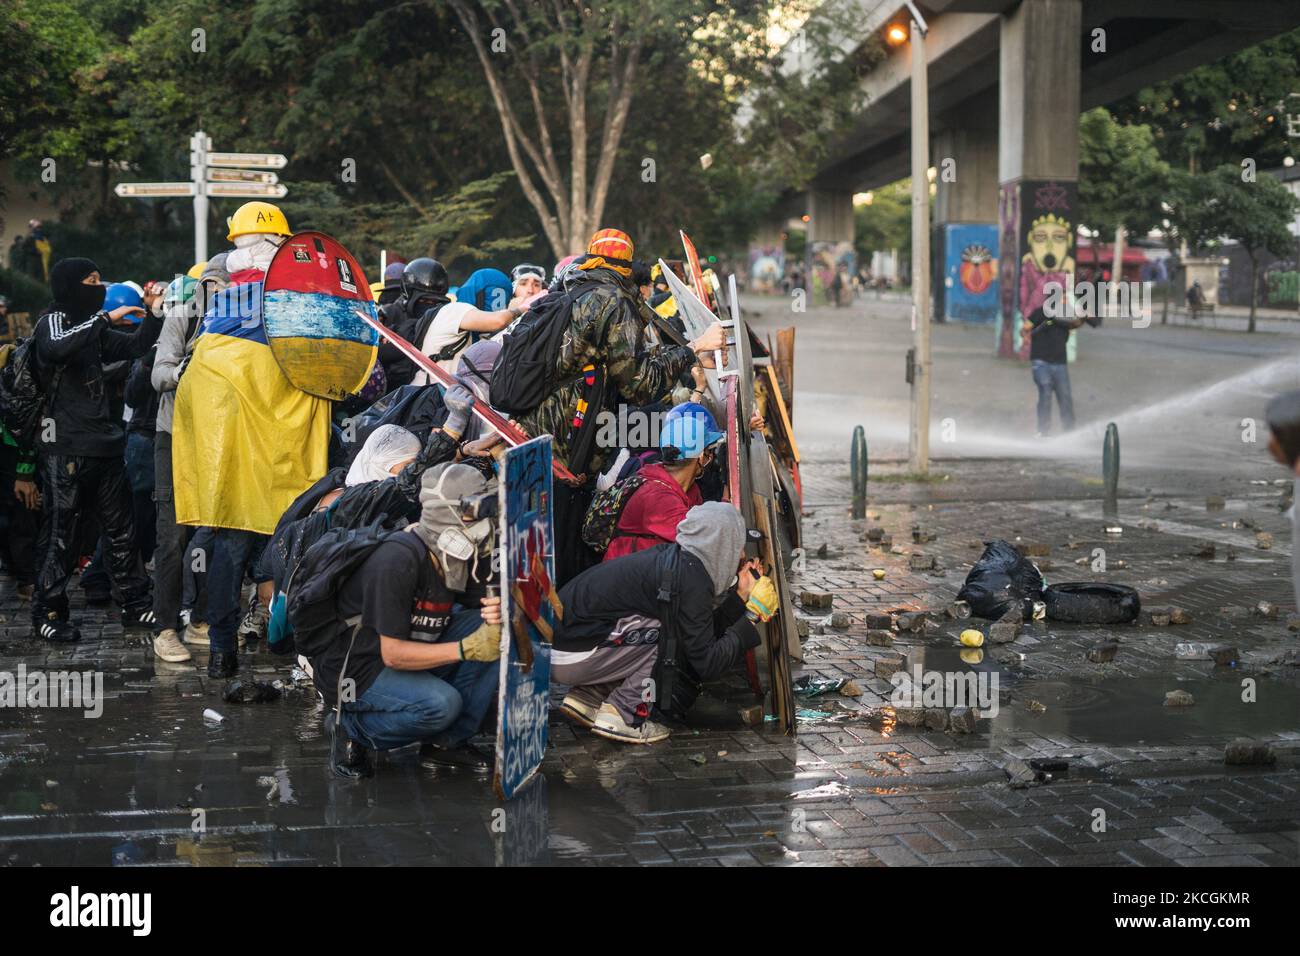 Demonstrators clash with riot police during a protest against the government in Medellin, Colombia, on June 28, 2021. Some people injured by police shoots with no letal guns. (Photo by Santiago Botero/NurPhoto) Stock Photo